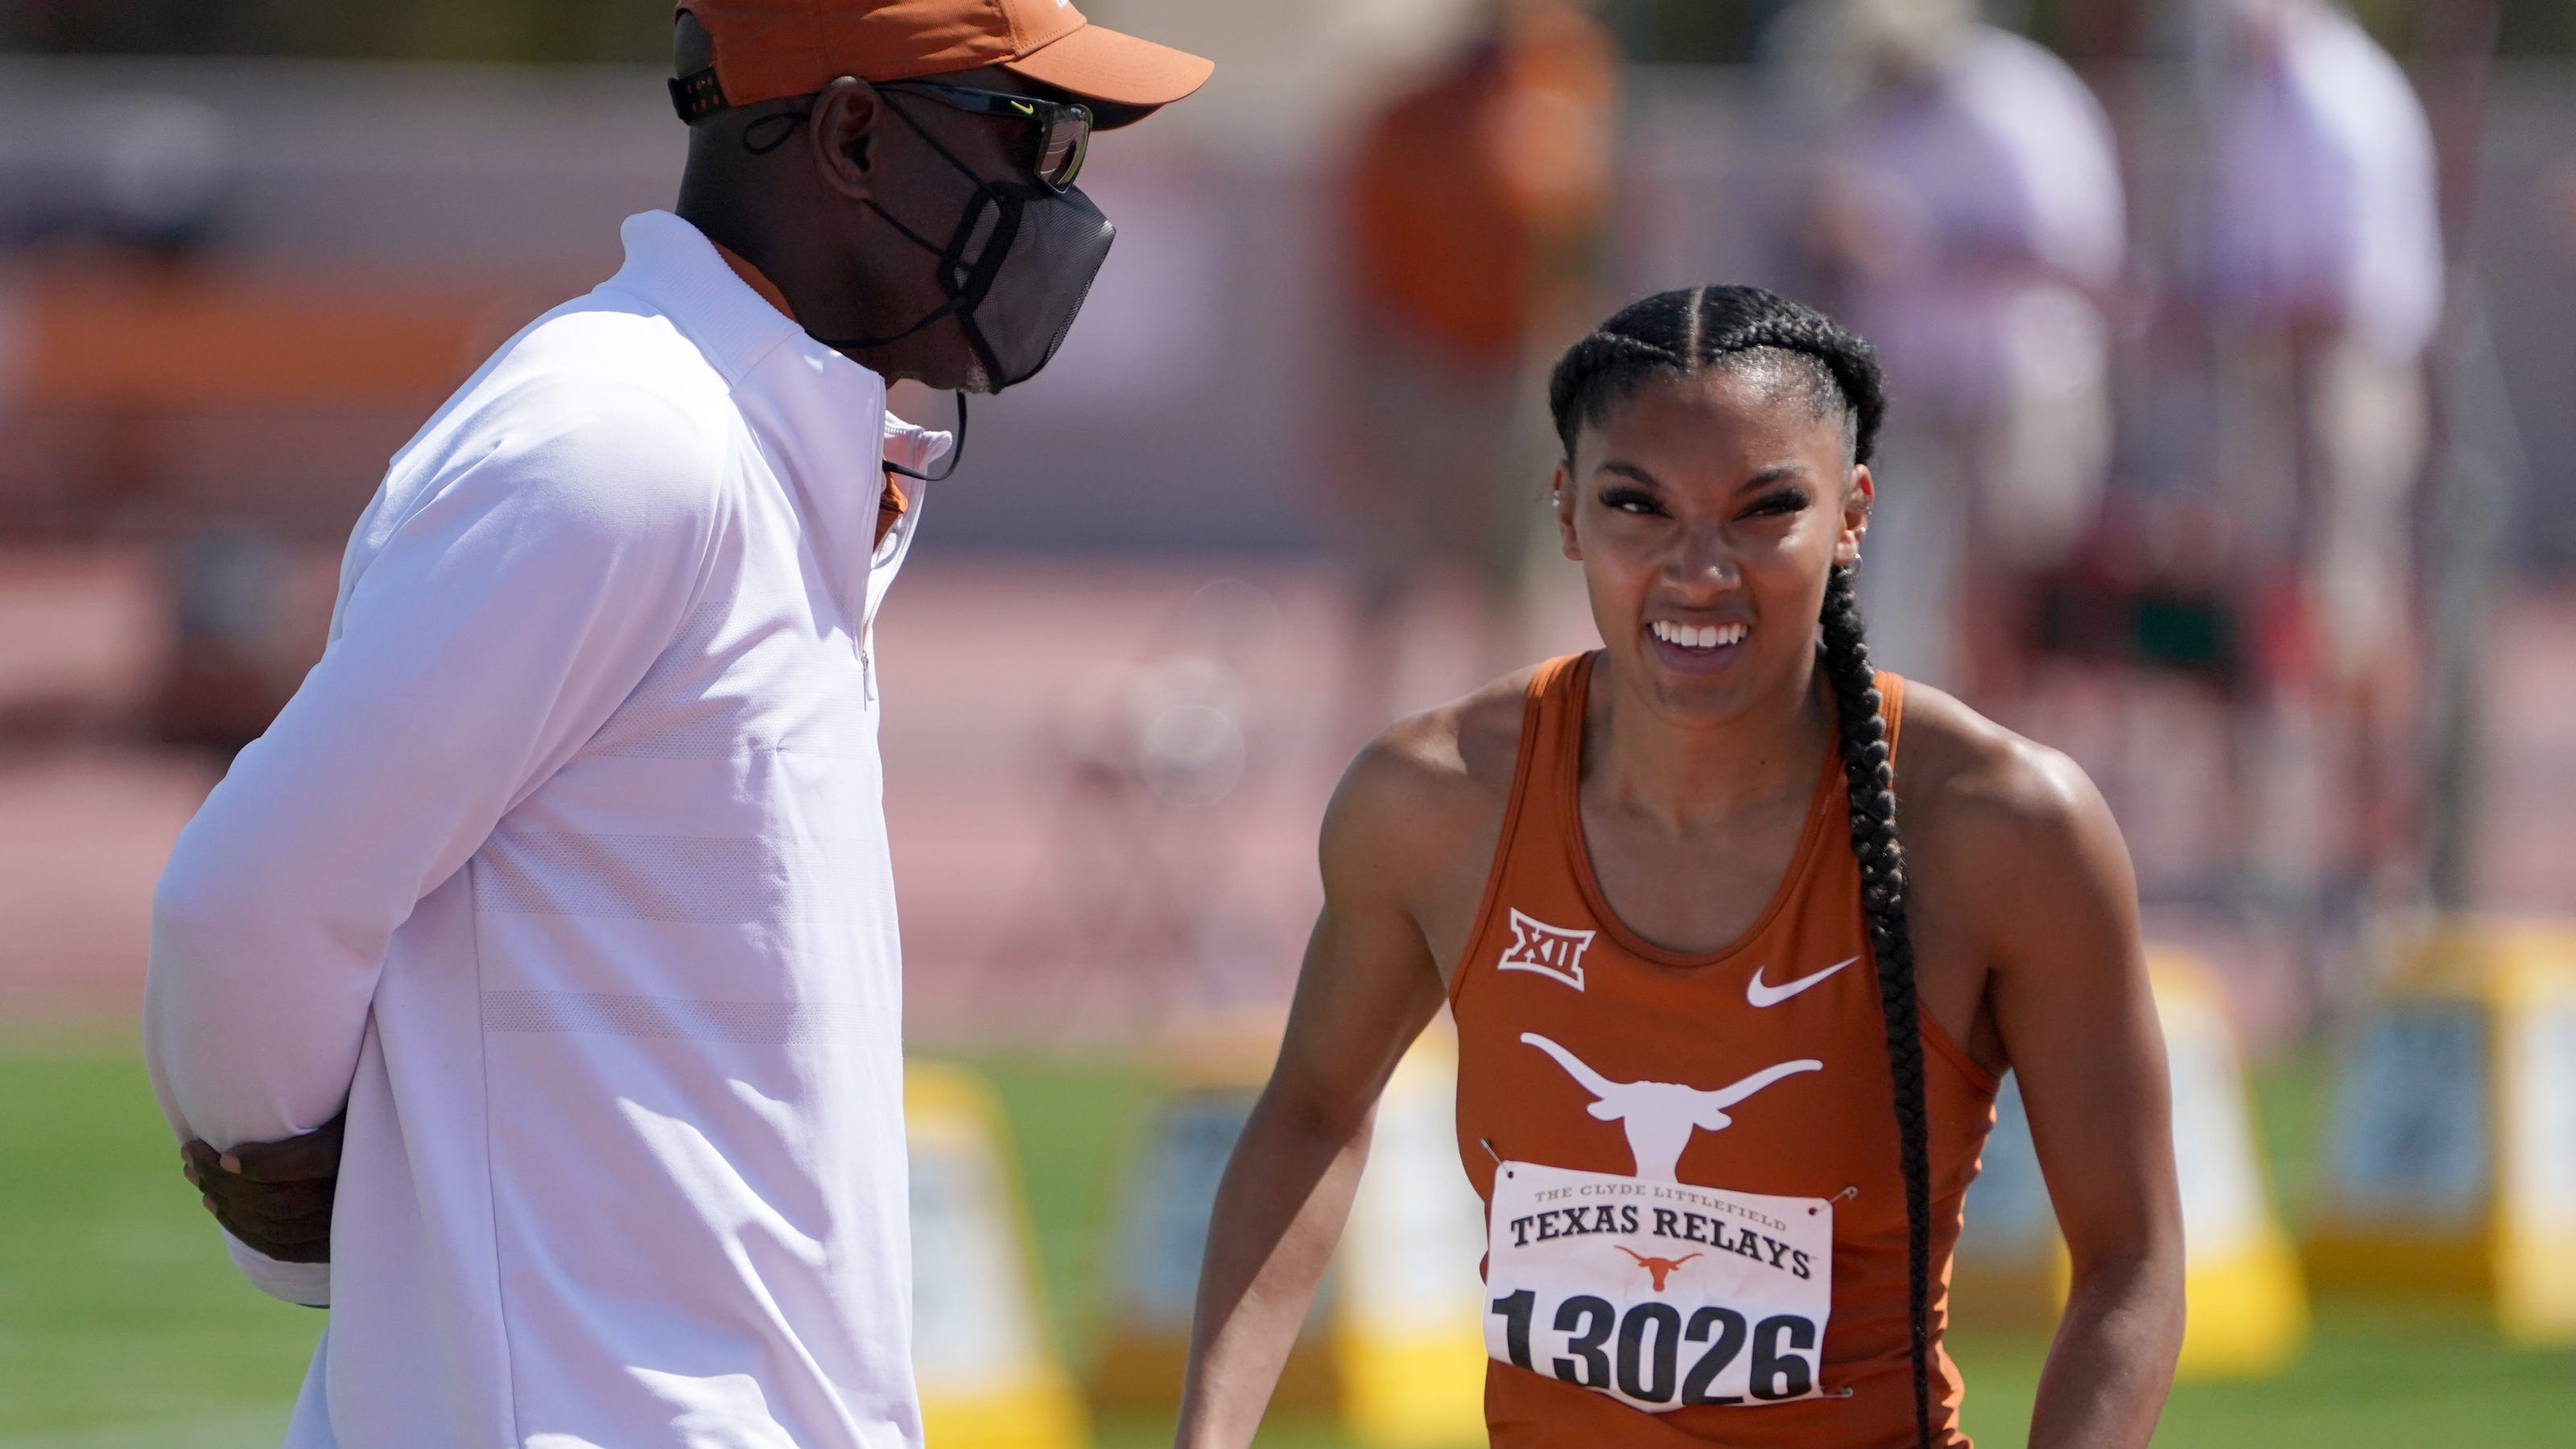 Texas' Tara Davis is hitting new heights on and off the track